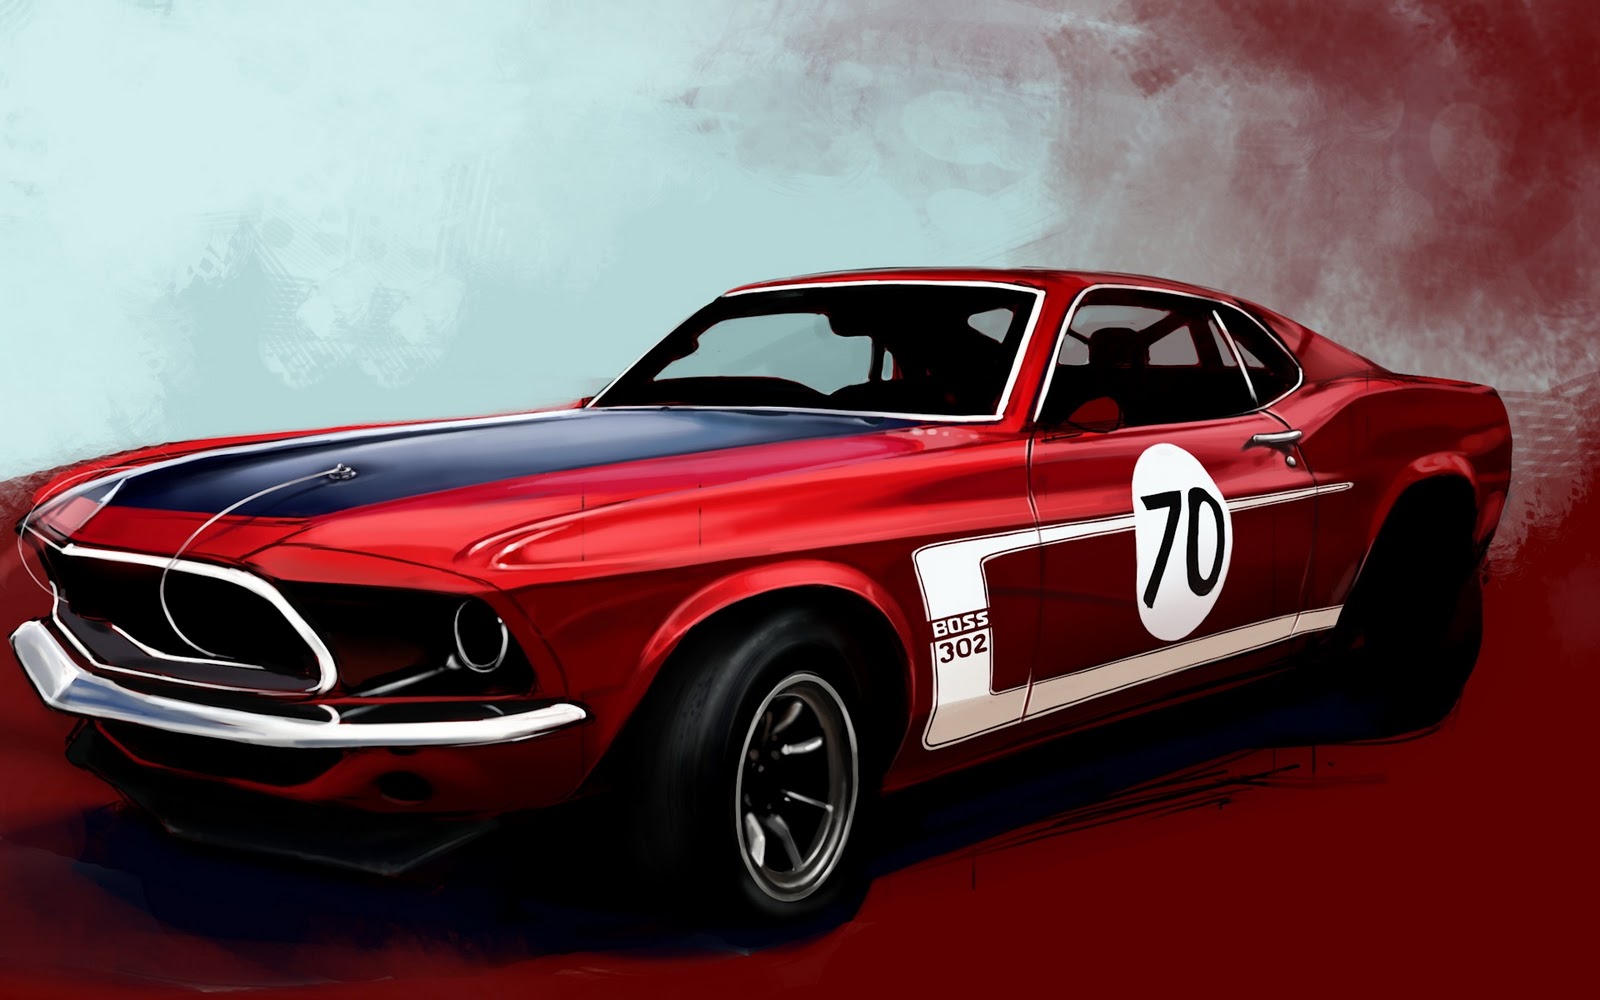 cool car wallpapers,land vehicle,vehicle,car,sports car,muscle car